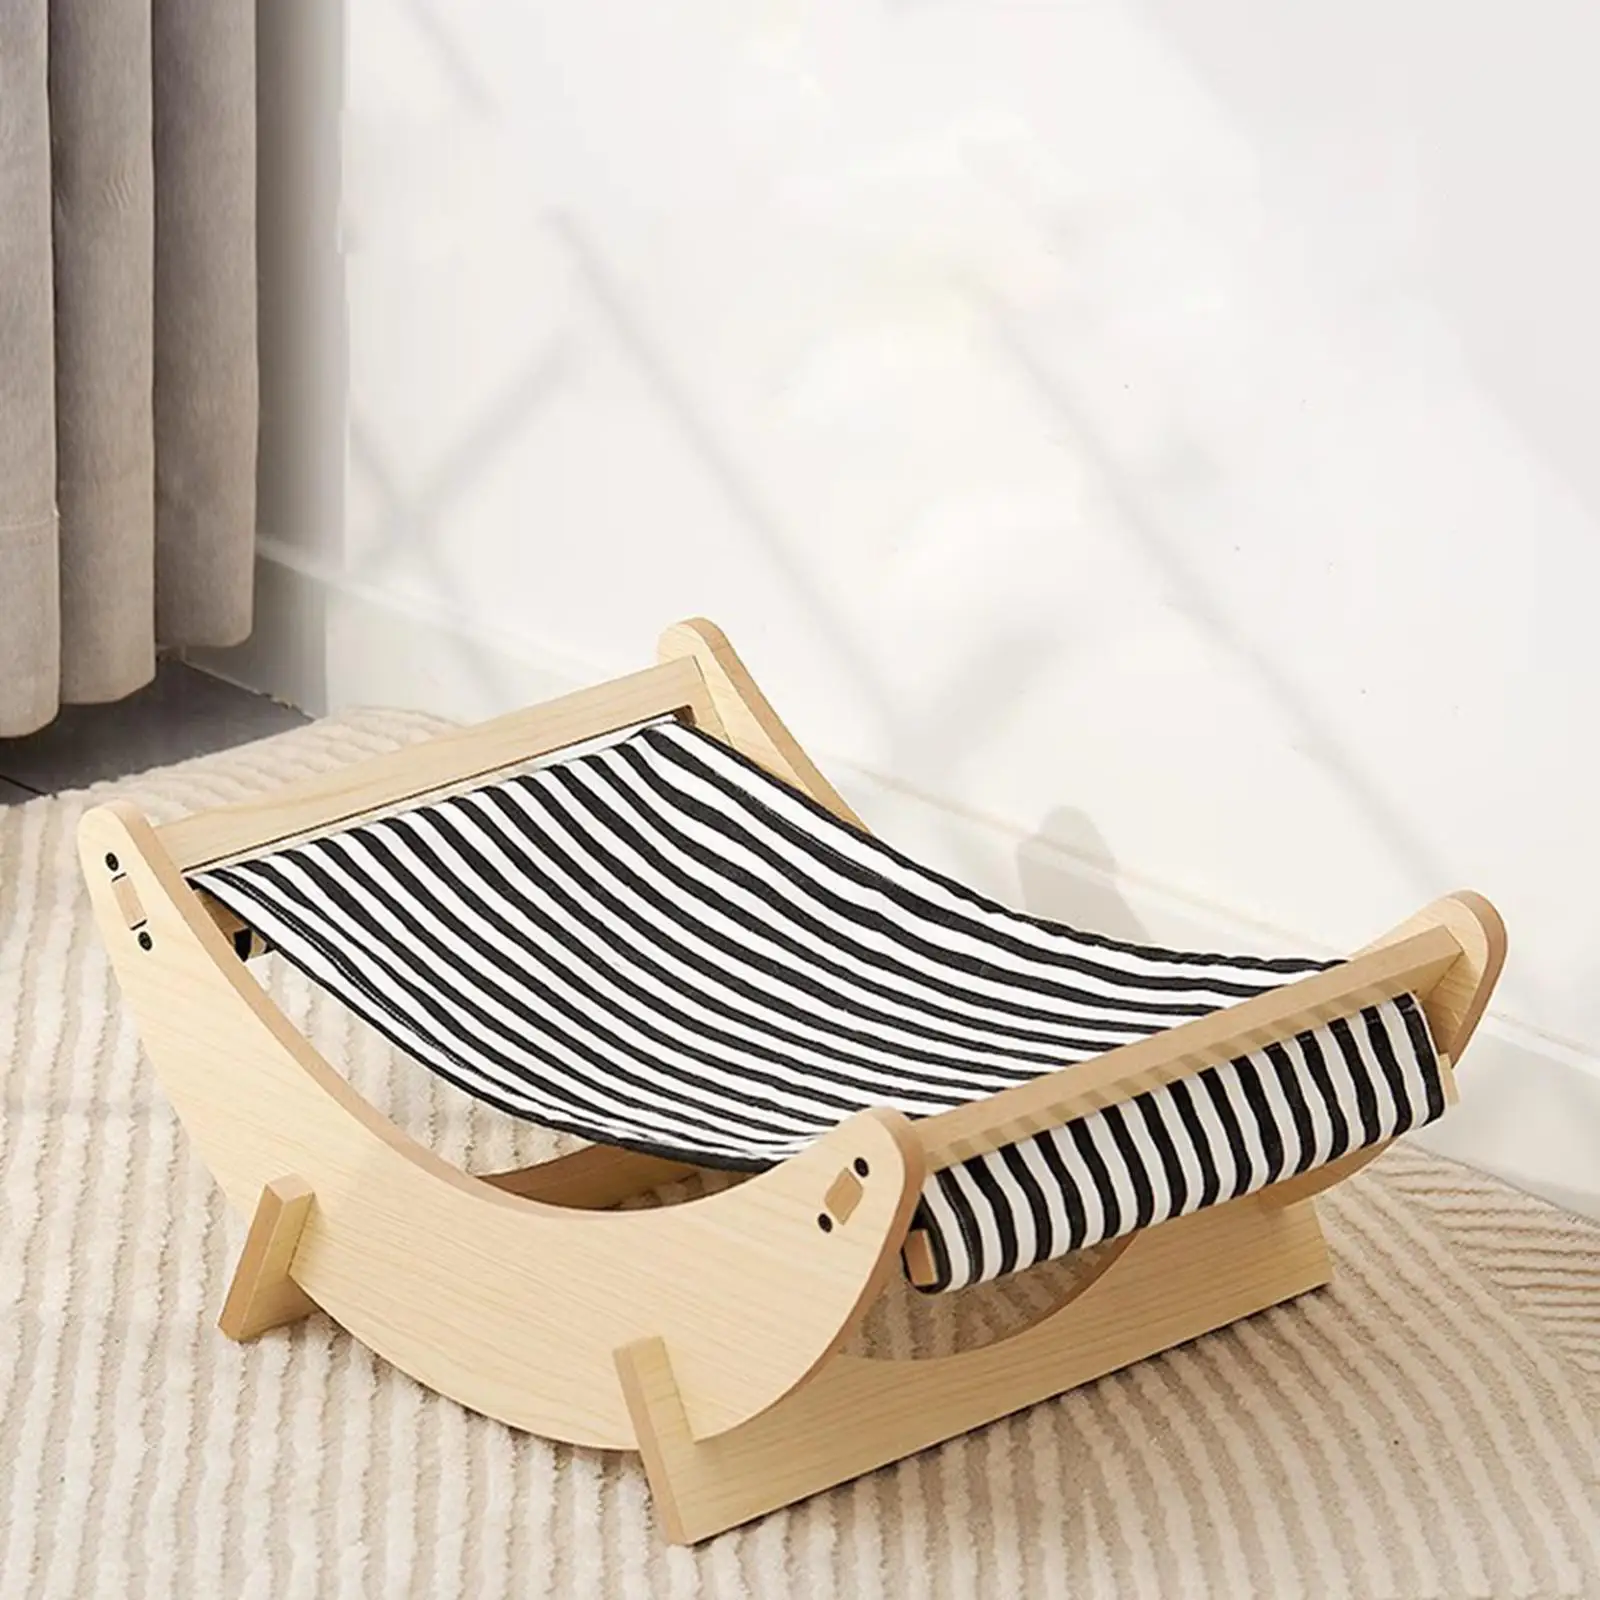 Cat Hammock Swing Bed Cat Rocking Chair Cat Sleeping Bed Cat Rocking Hammock Bed for Kitten Puppy Cats and Small Dogs